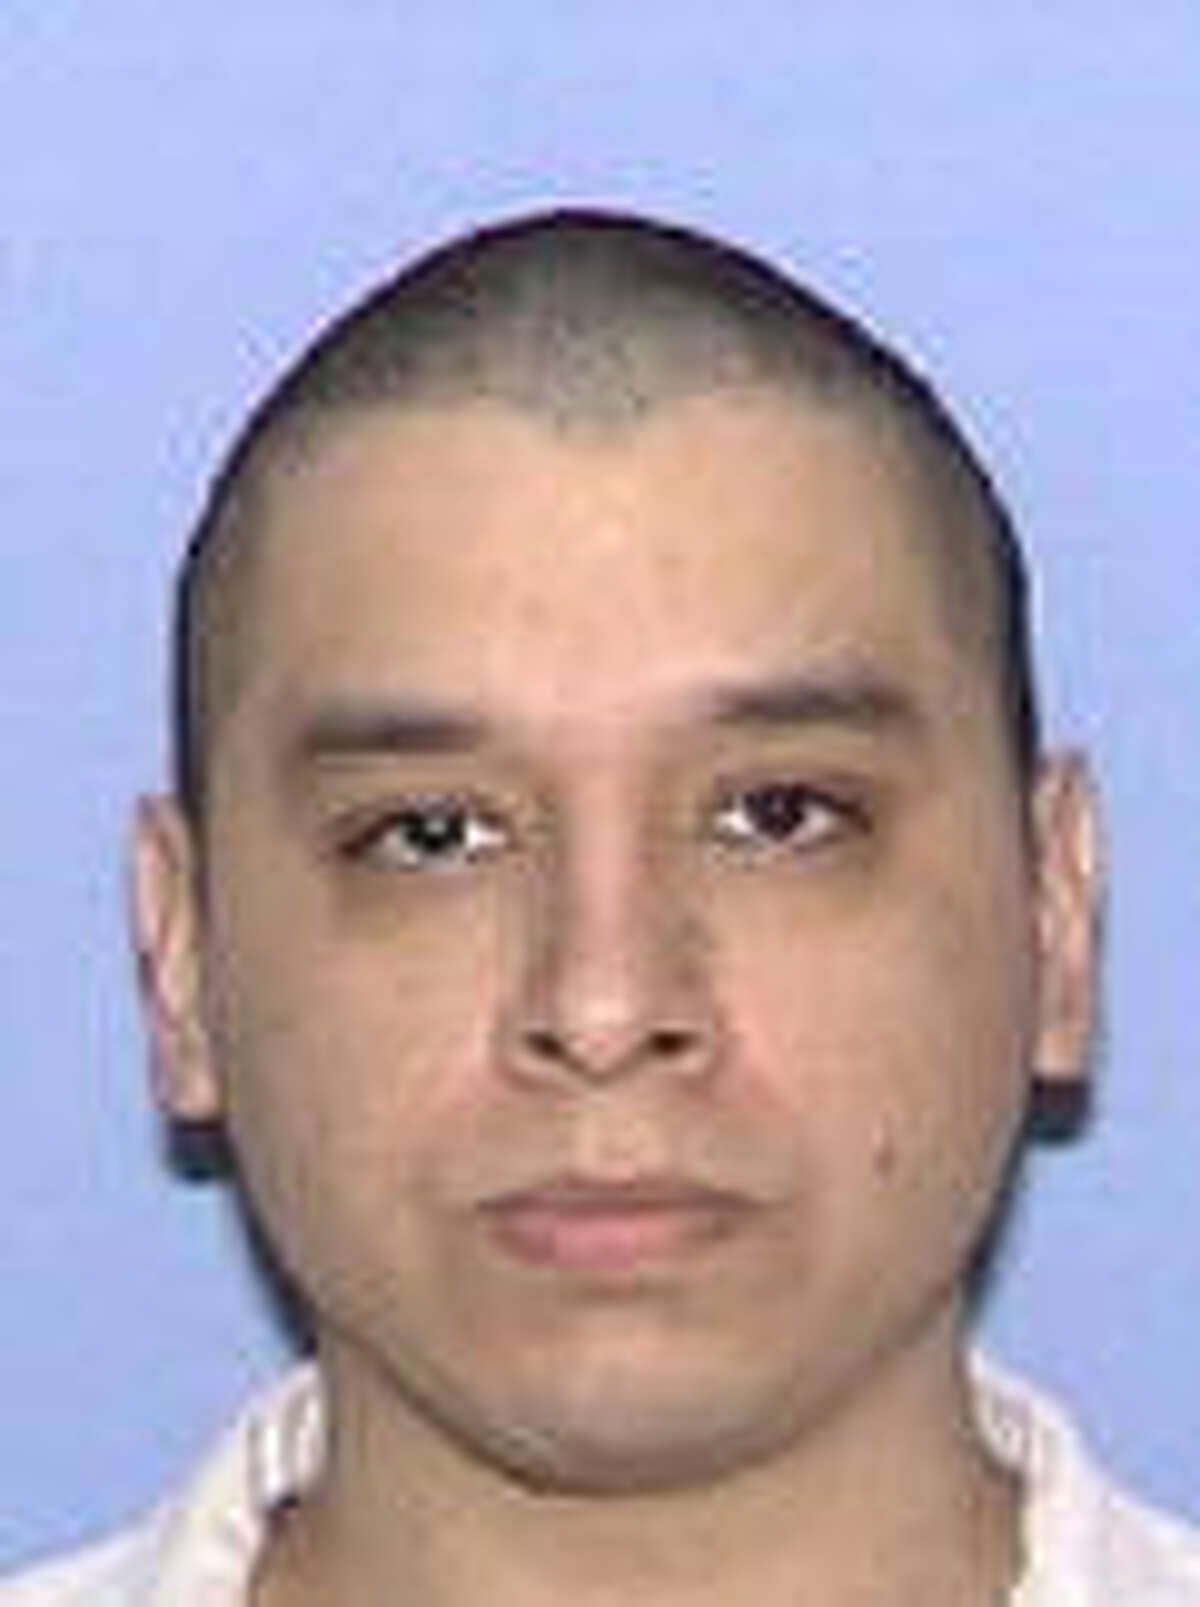  Joseph Garcia is scheduled for execution in August.